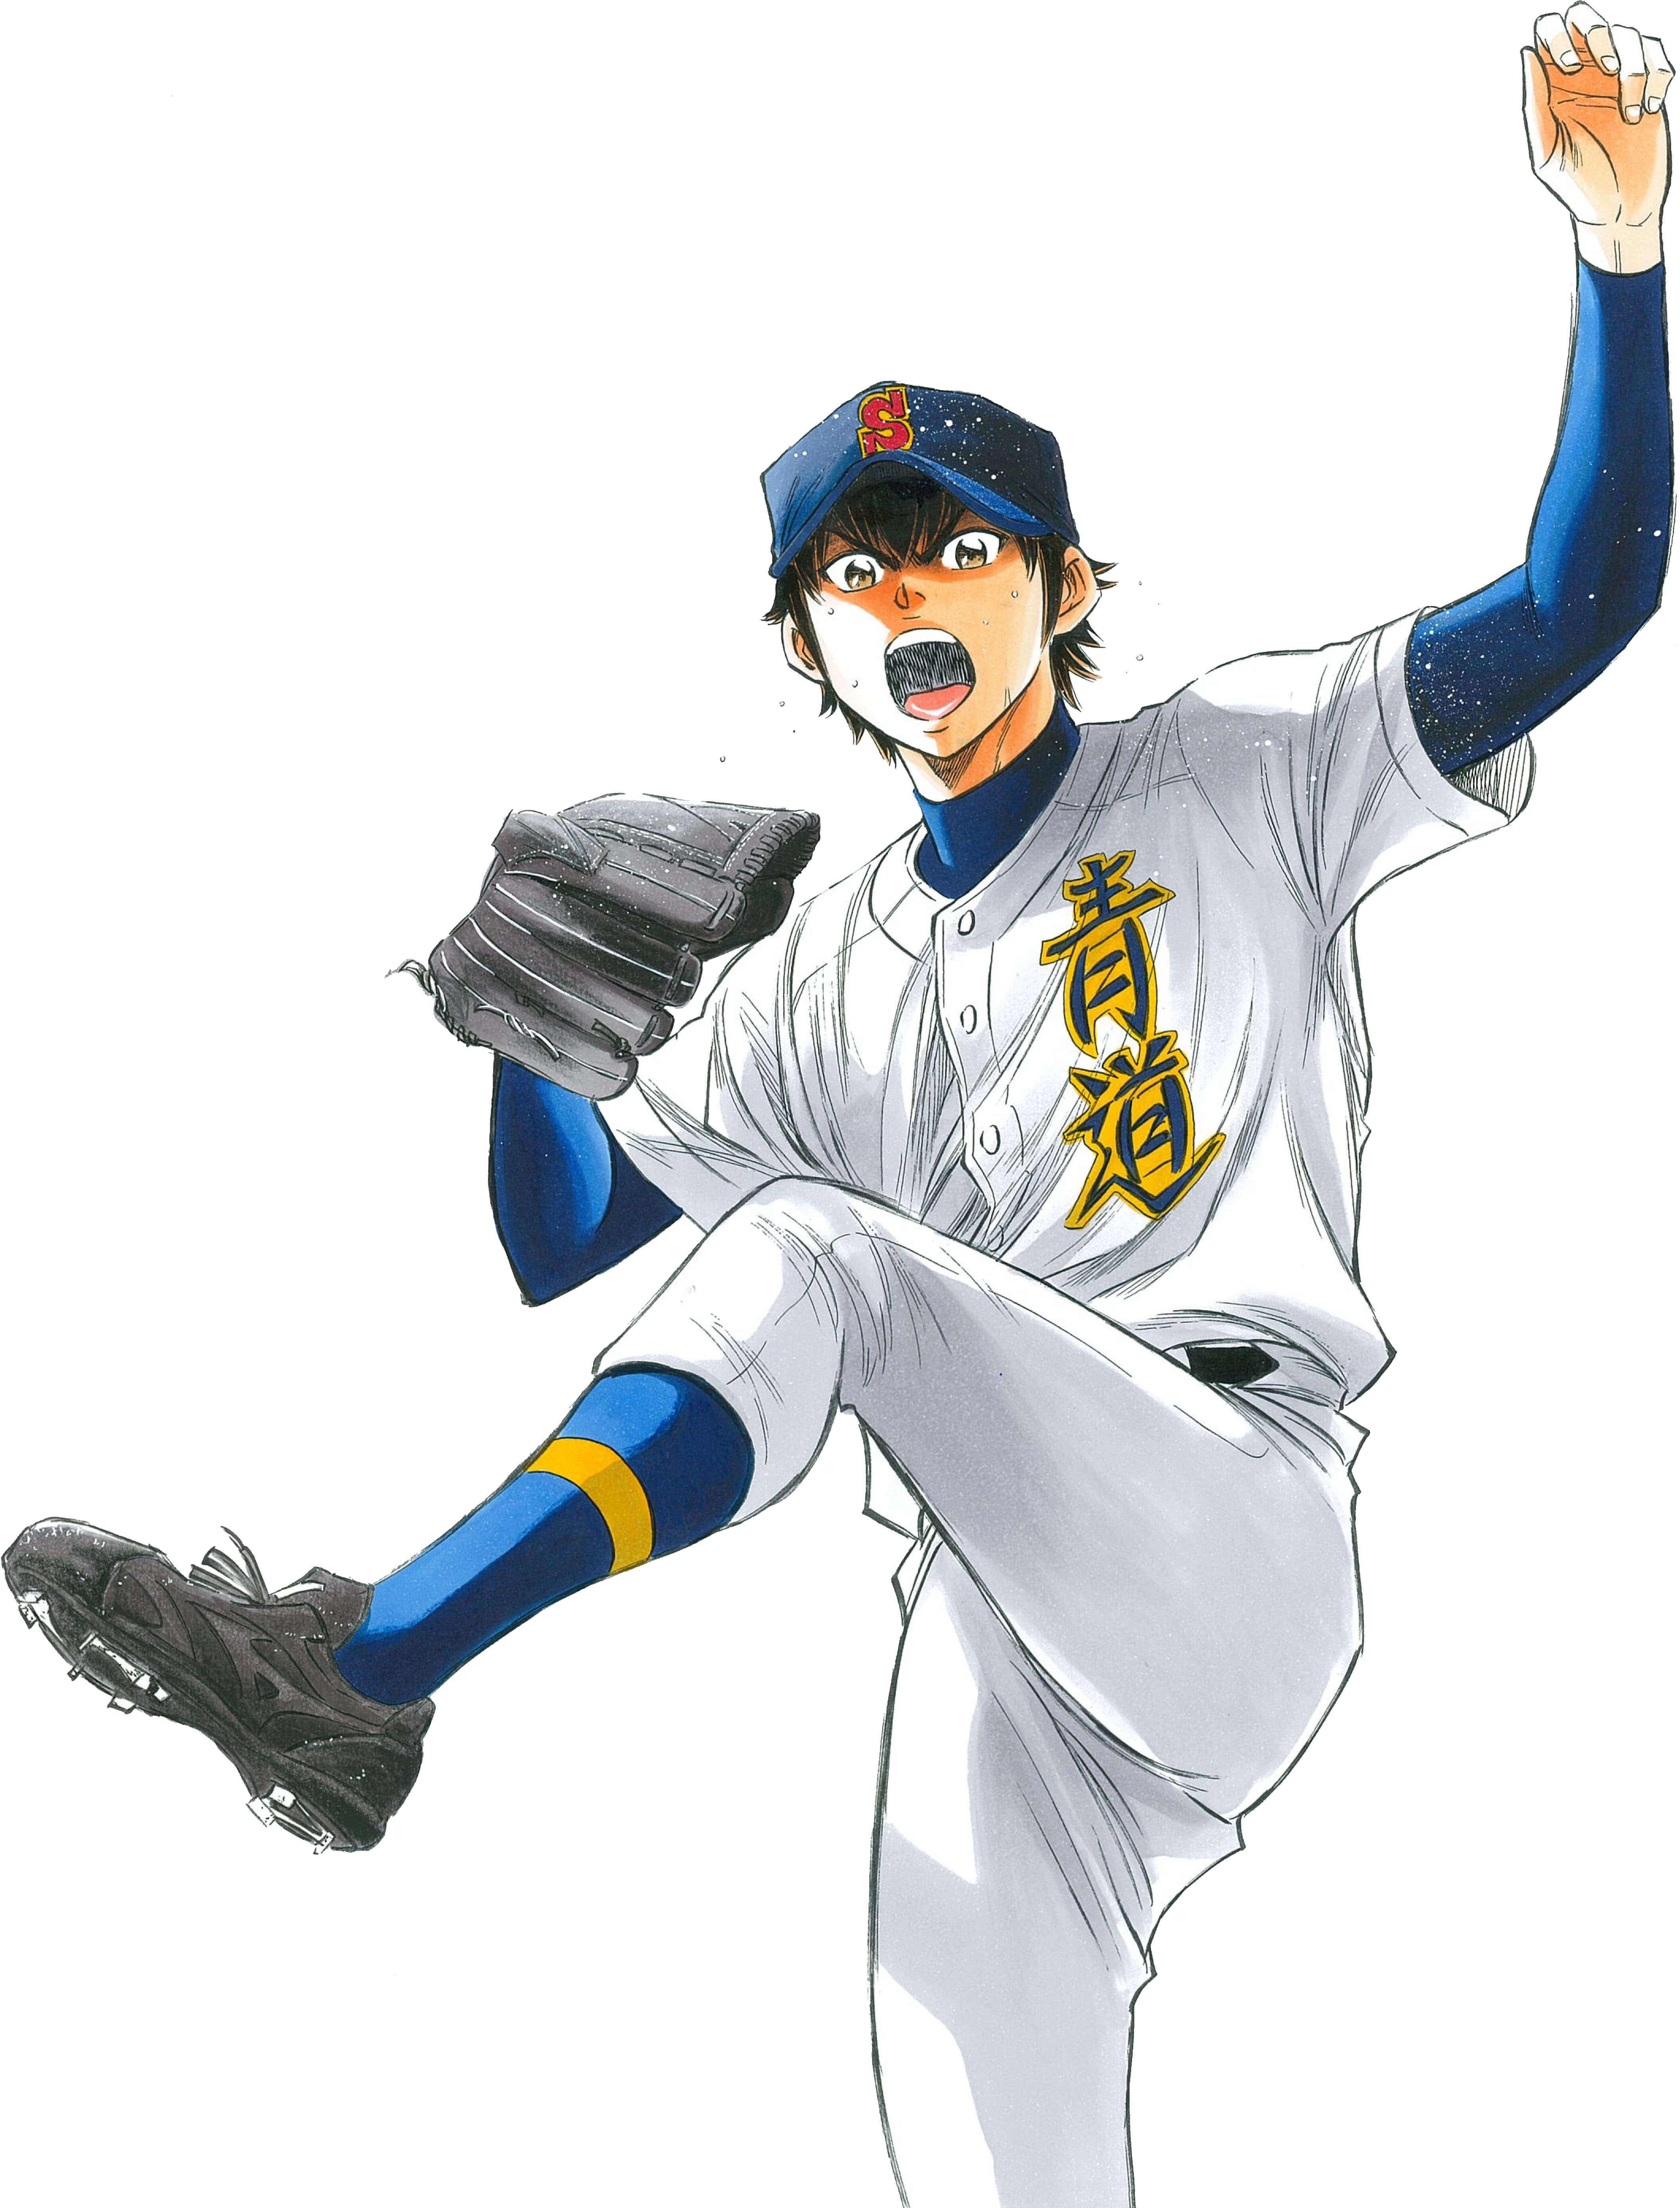 Why Ace of Diamond Act 3 Could Be the Hit Baseball Animes Best Yet